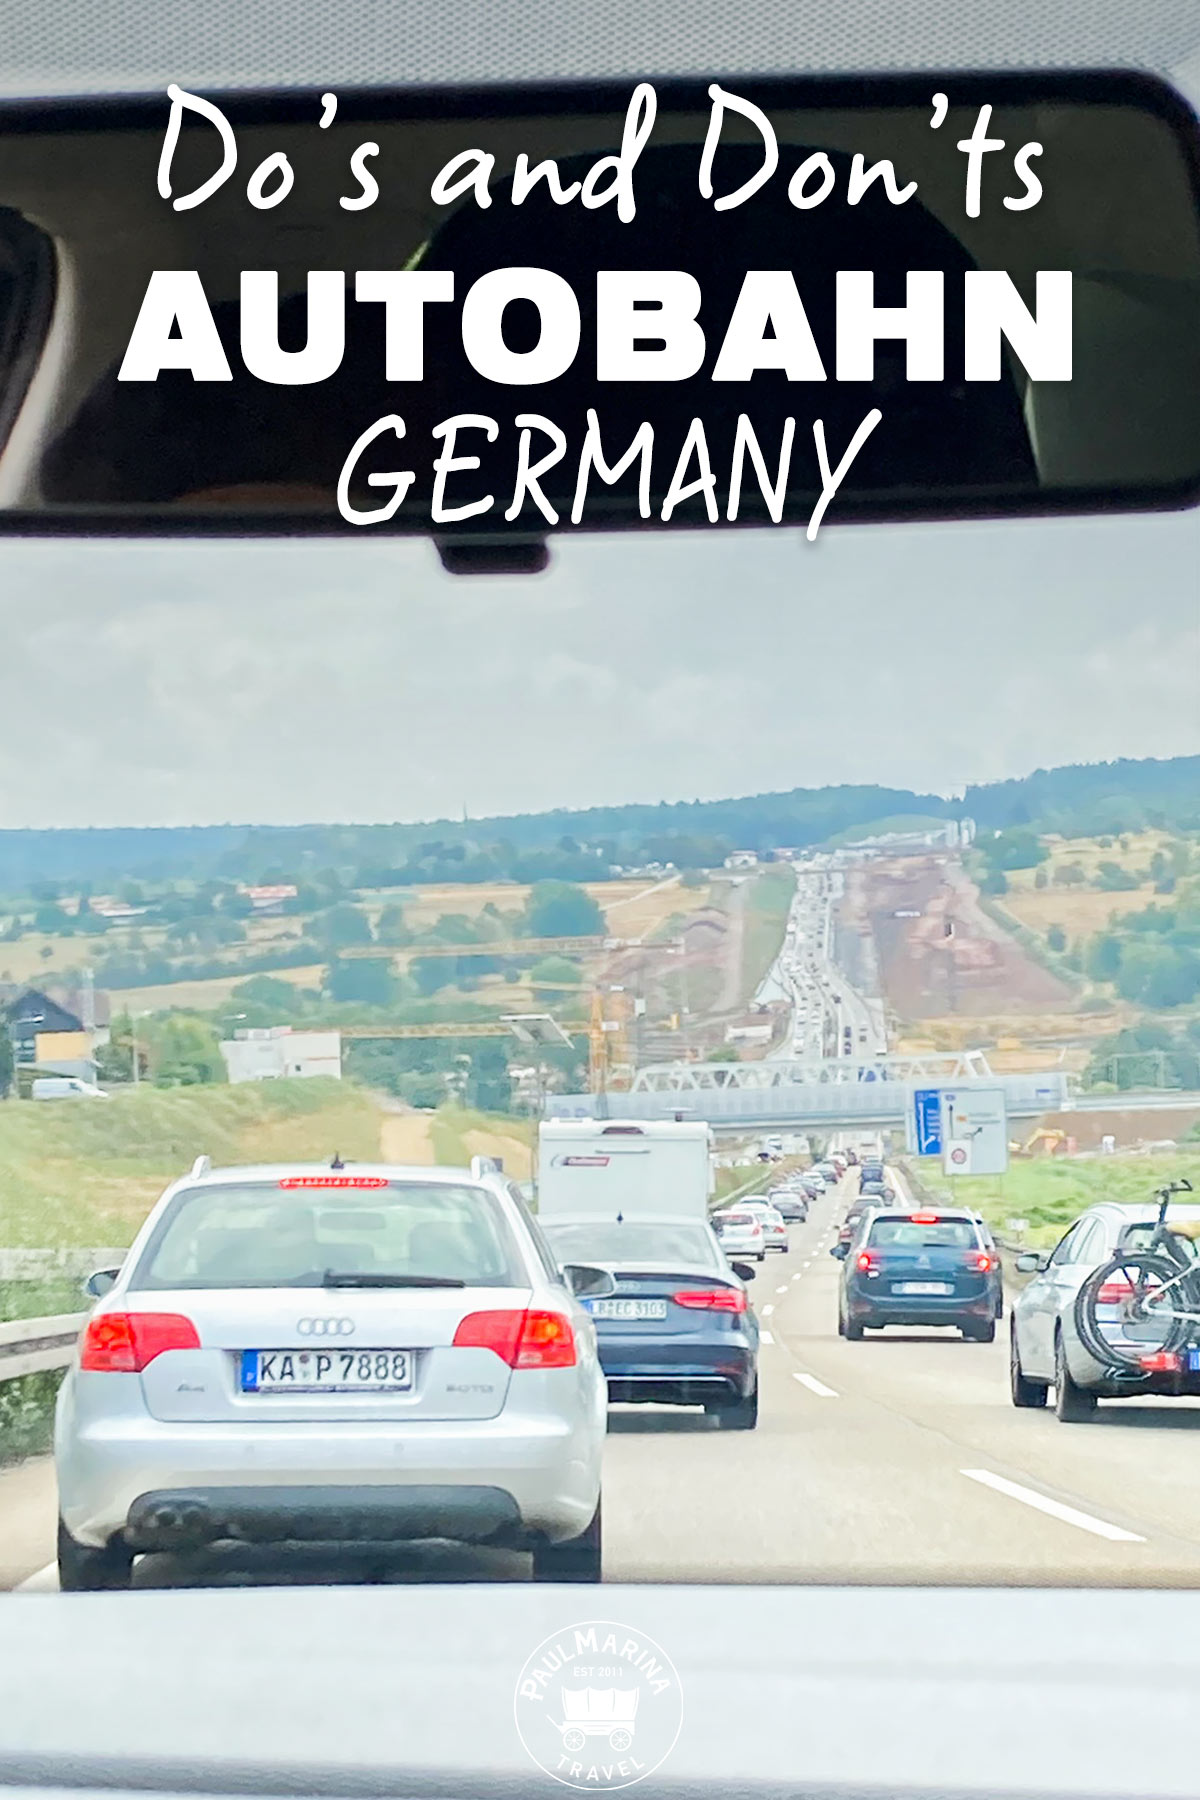 The German Autobahn Highway pin picture